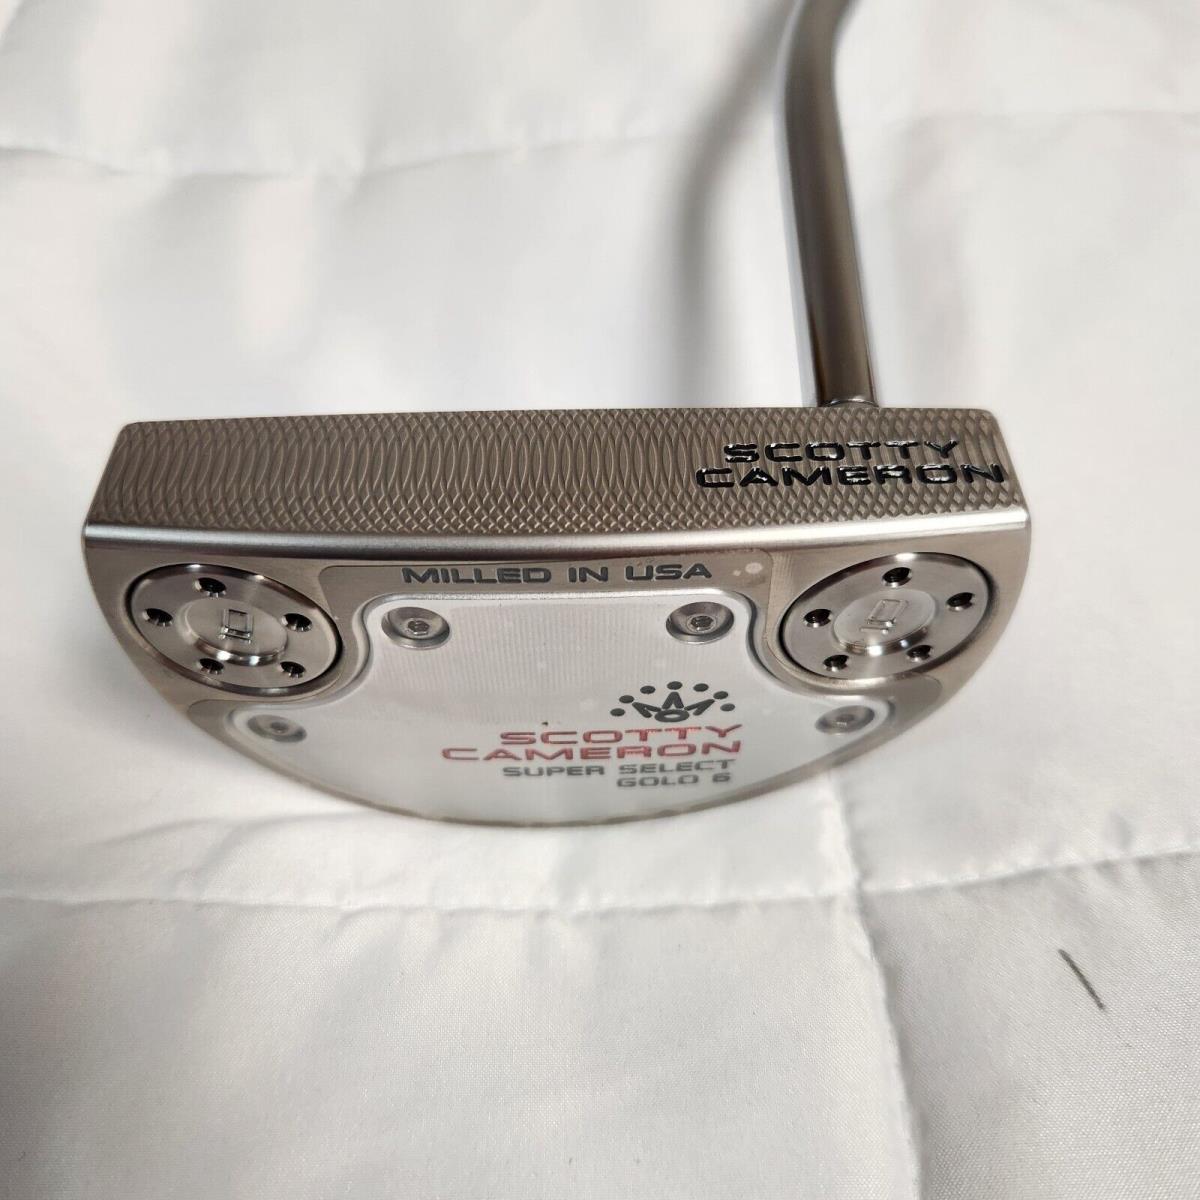 2023 Scotty Cameron Super Slect Golo 6 Putter 35 Right-handed Read